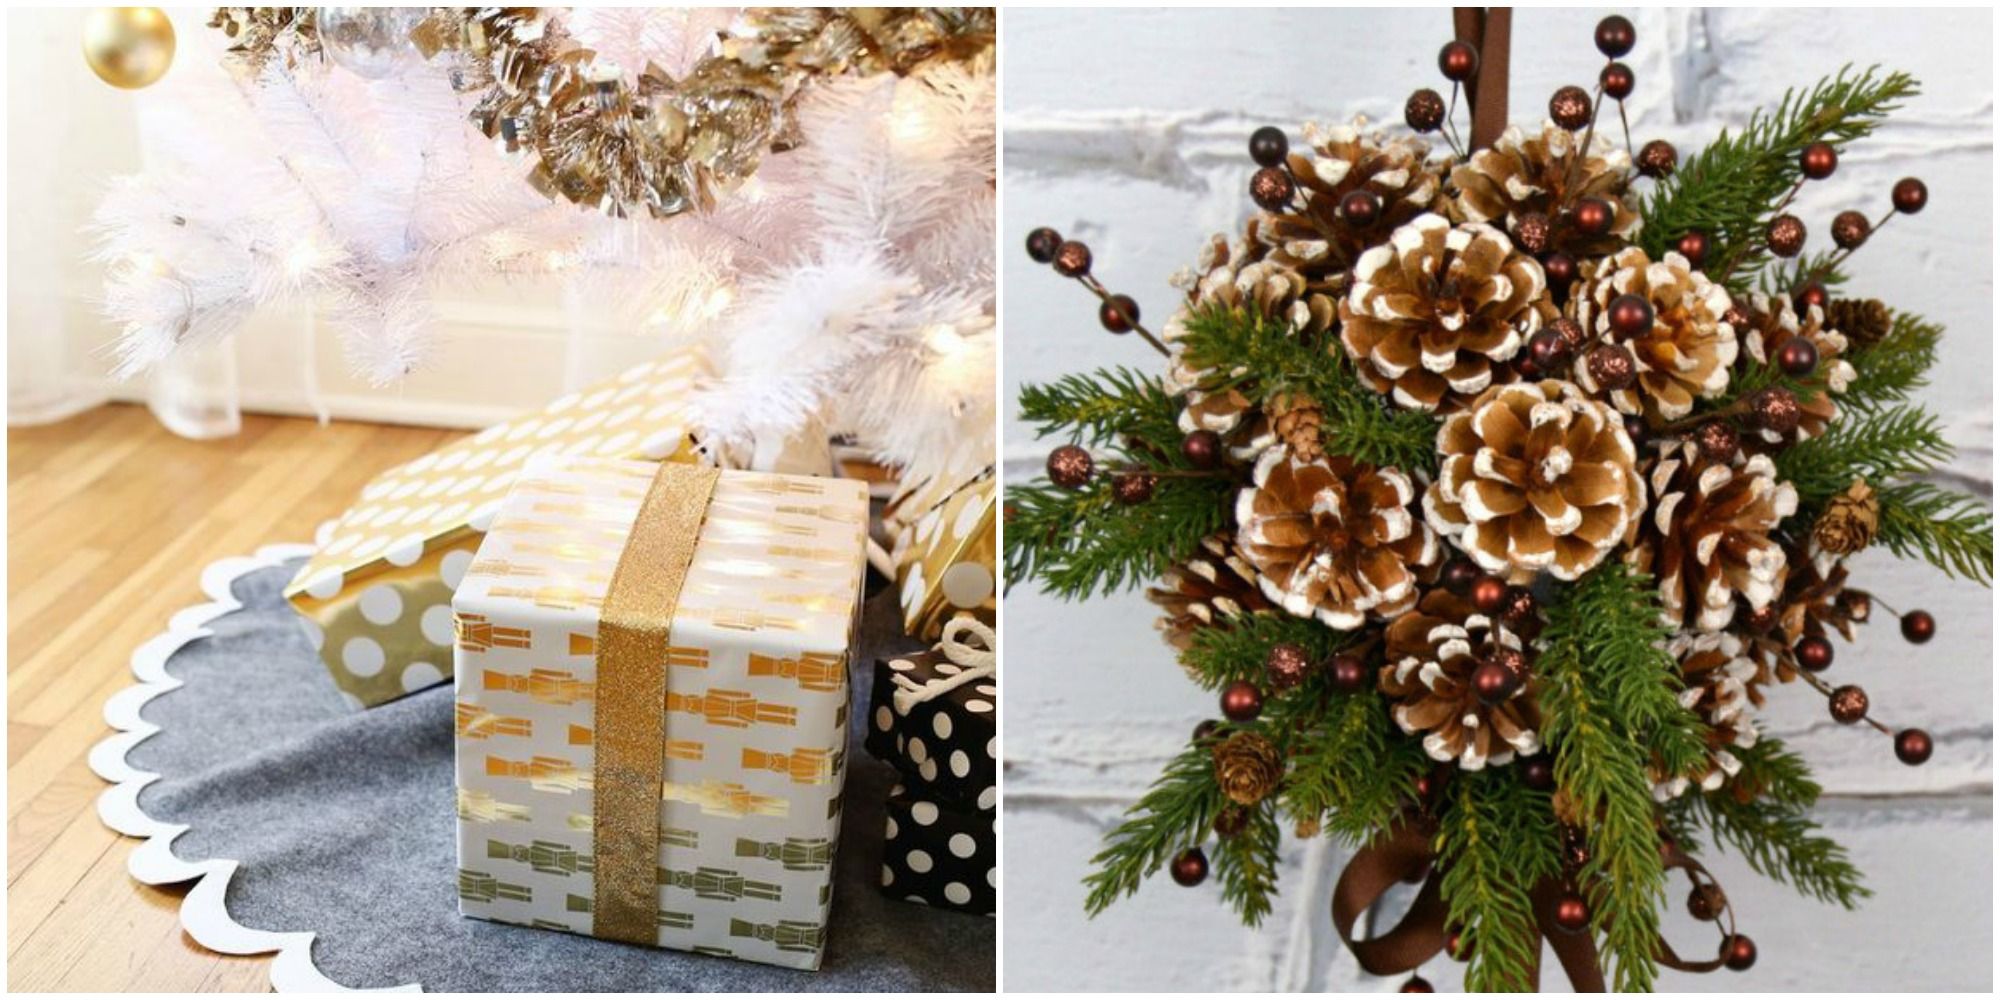 20 Easy DIY Christmas Decorations Homemade Ideas For Holiday